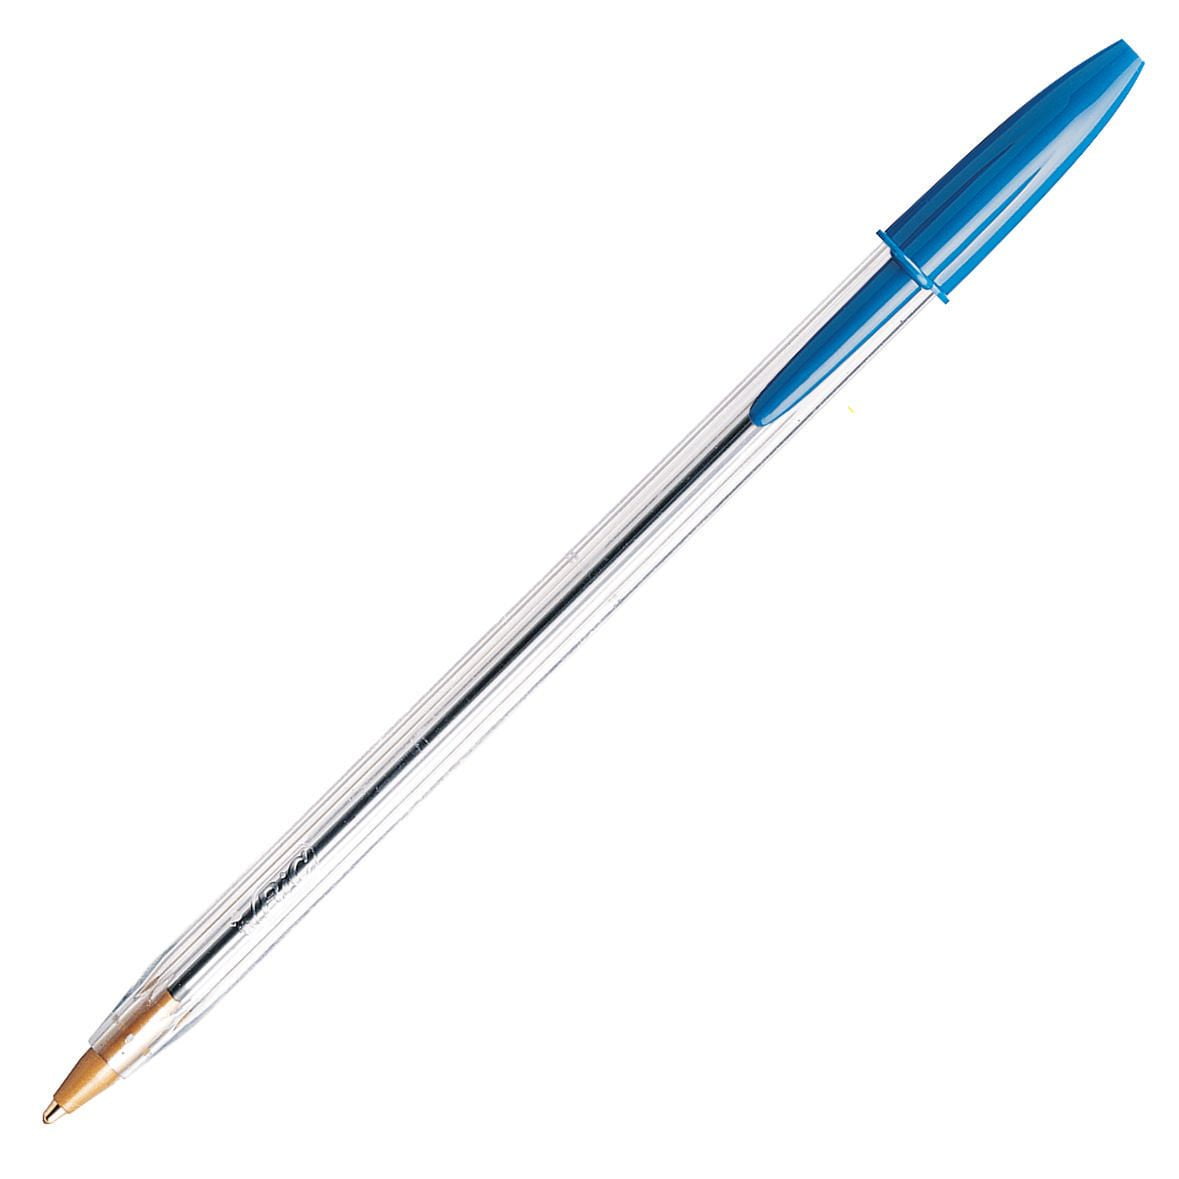 Cristal Orginal Ballpoint Pen, Medium Point (1.0mm), With Tungsten Carbide  Ball For Smooth Flow, Blue, 10-Count, Pack of 10